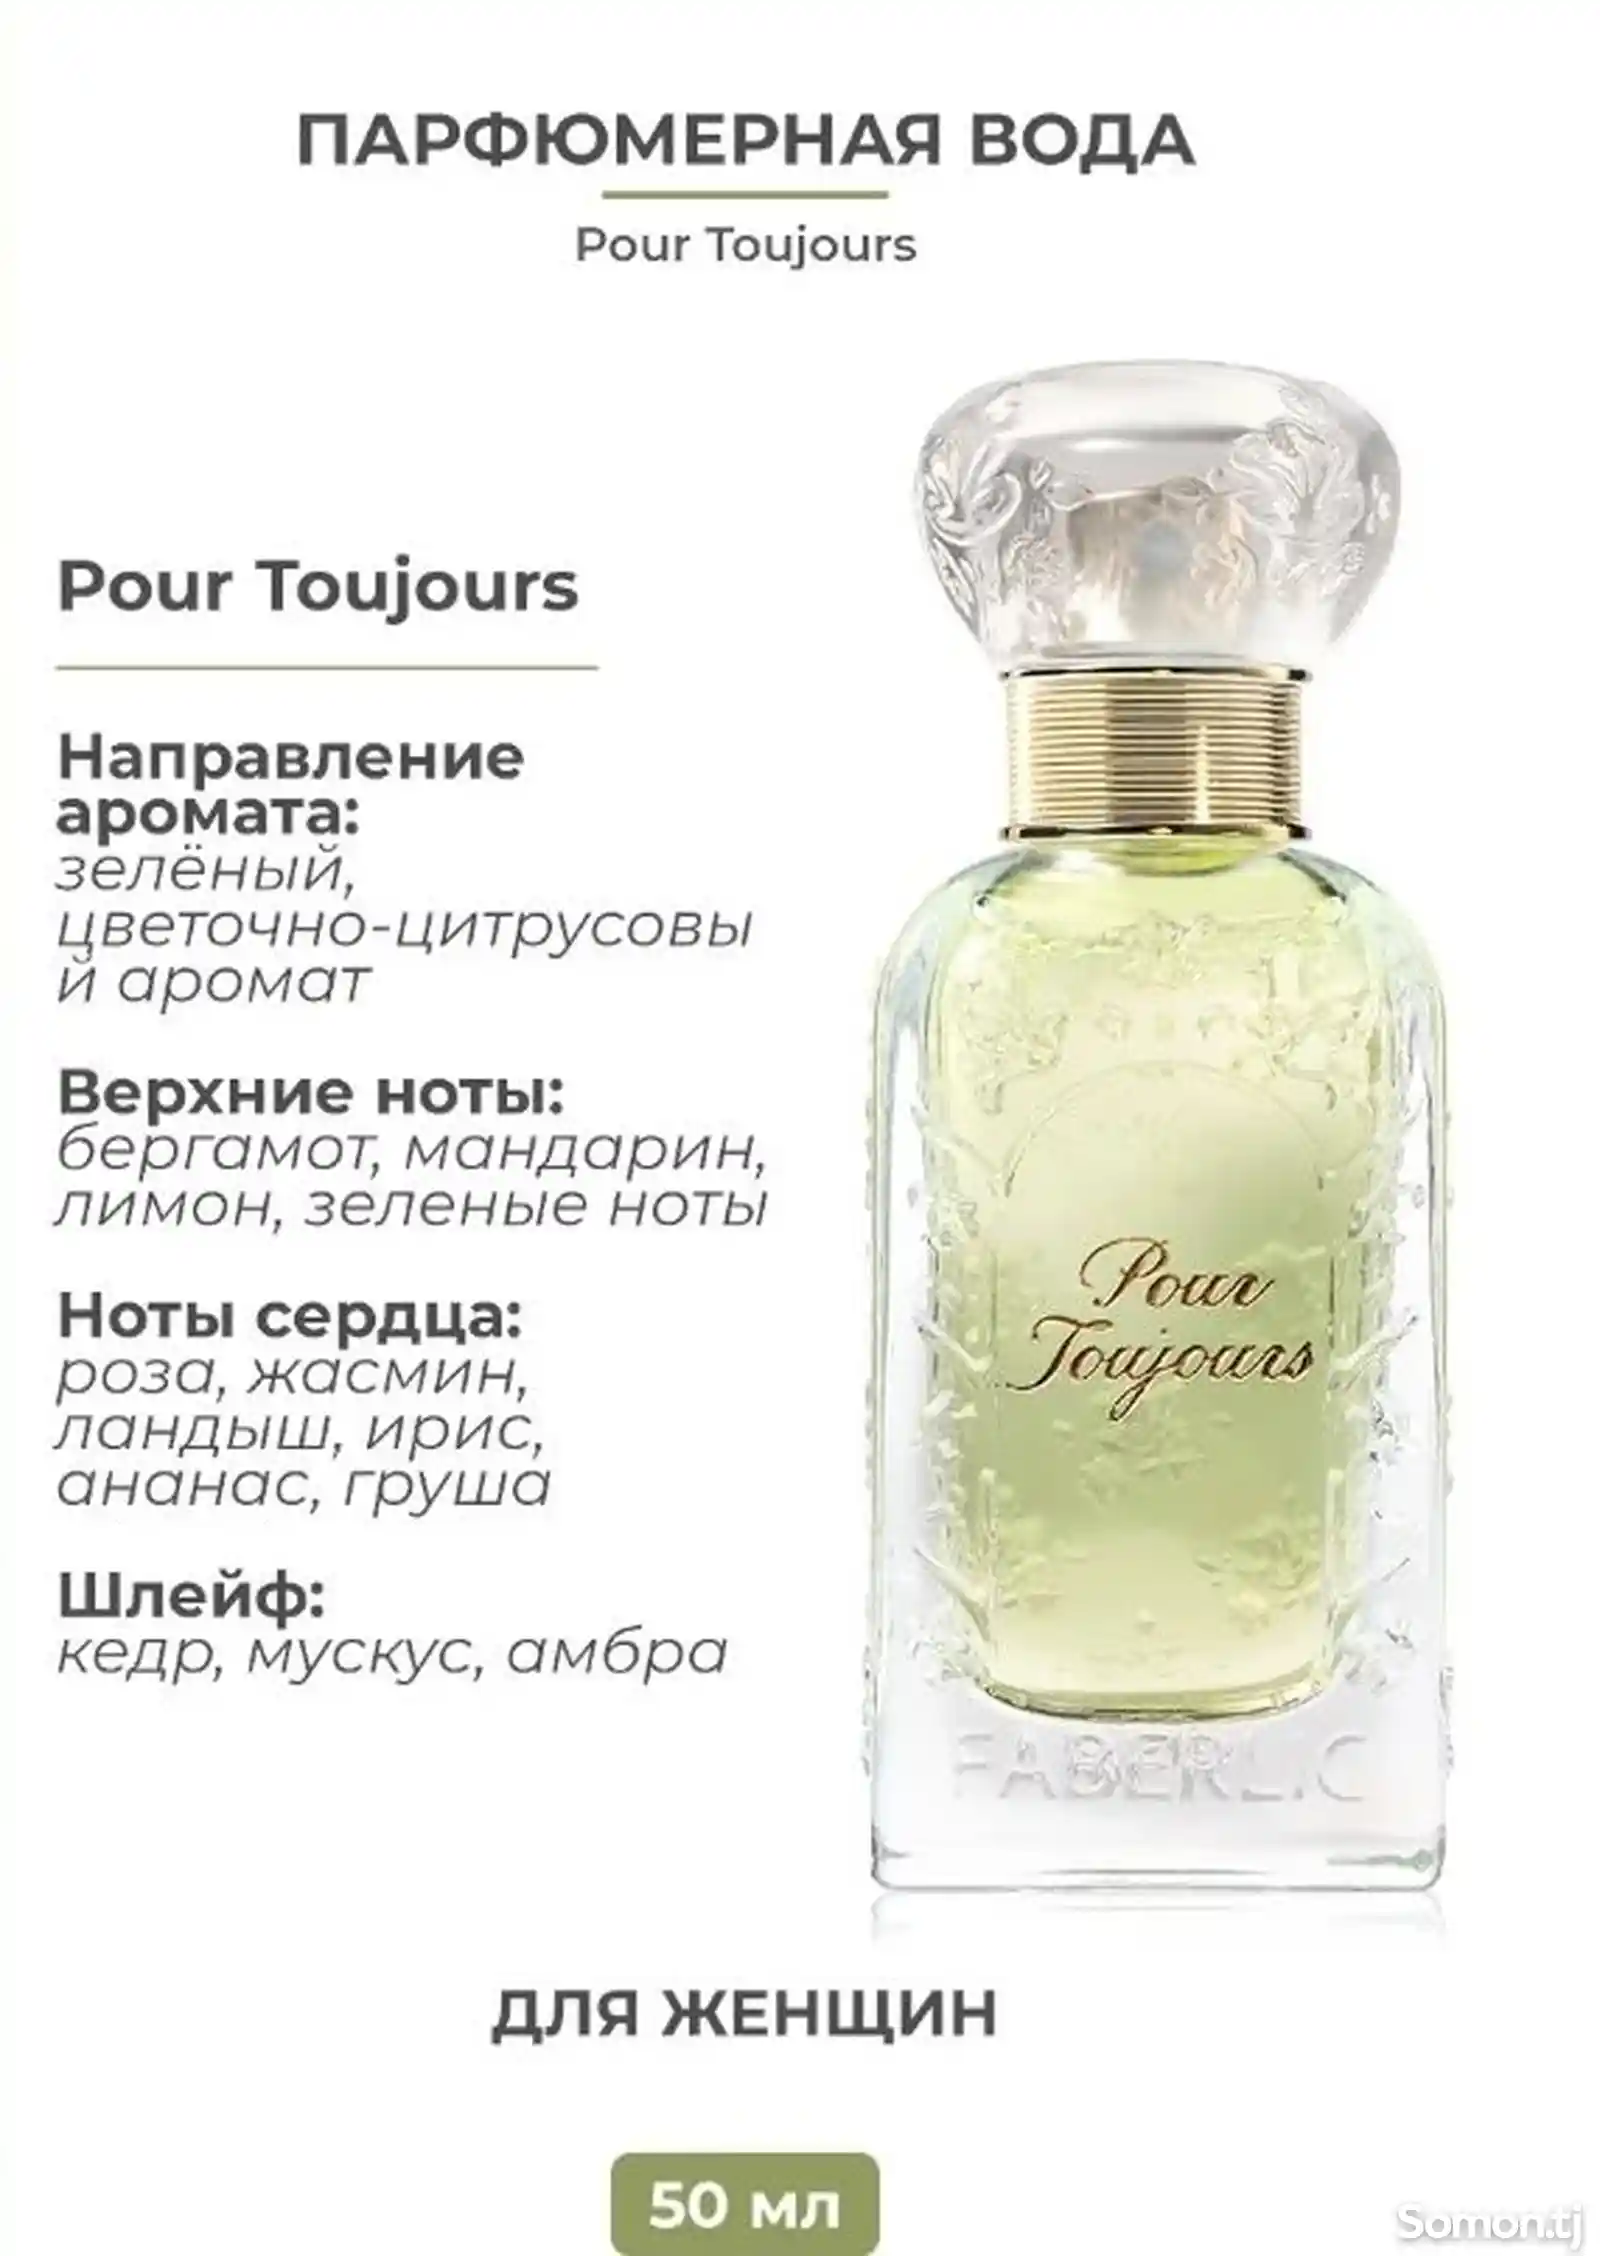 Набор от Pour Toujours-3